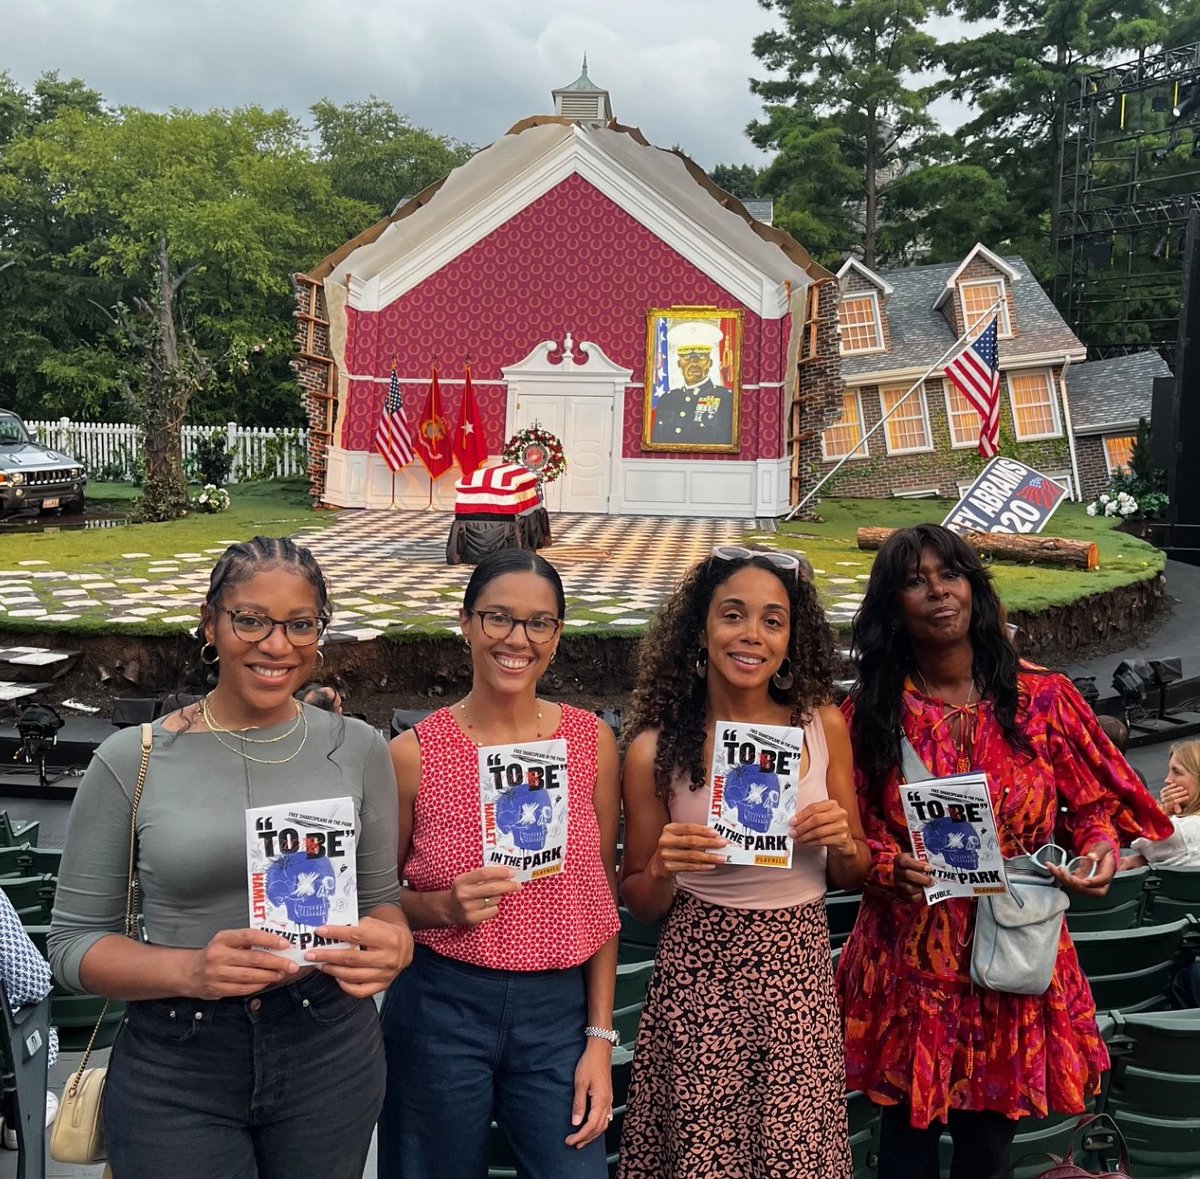 Special guest Assemblywoman Latoya Joyner joined us for the last weekend of Hamlet performances. Thank you @JoinJoyner for supporting the FY24 NYSCA funding to help us & our colleagues throughout the state's arts and culture community. We are honored to host our state leaders!